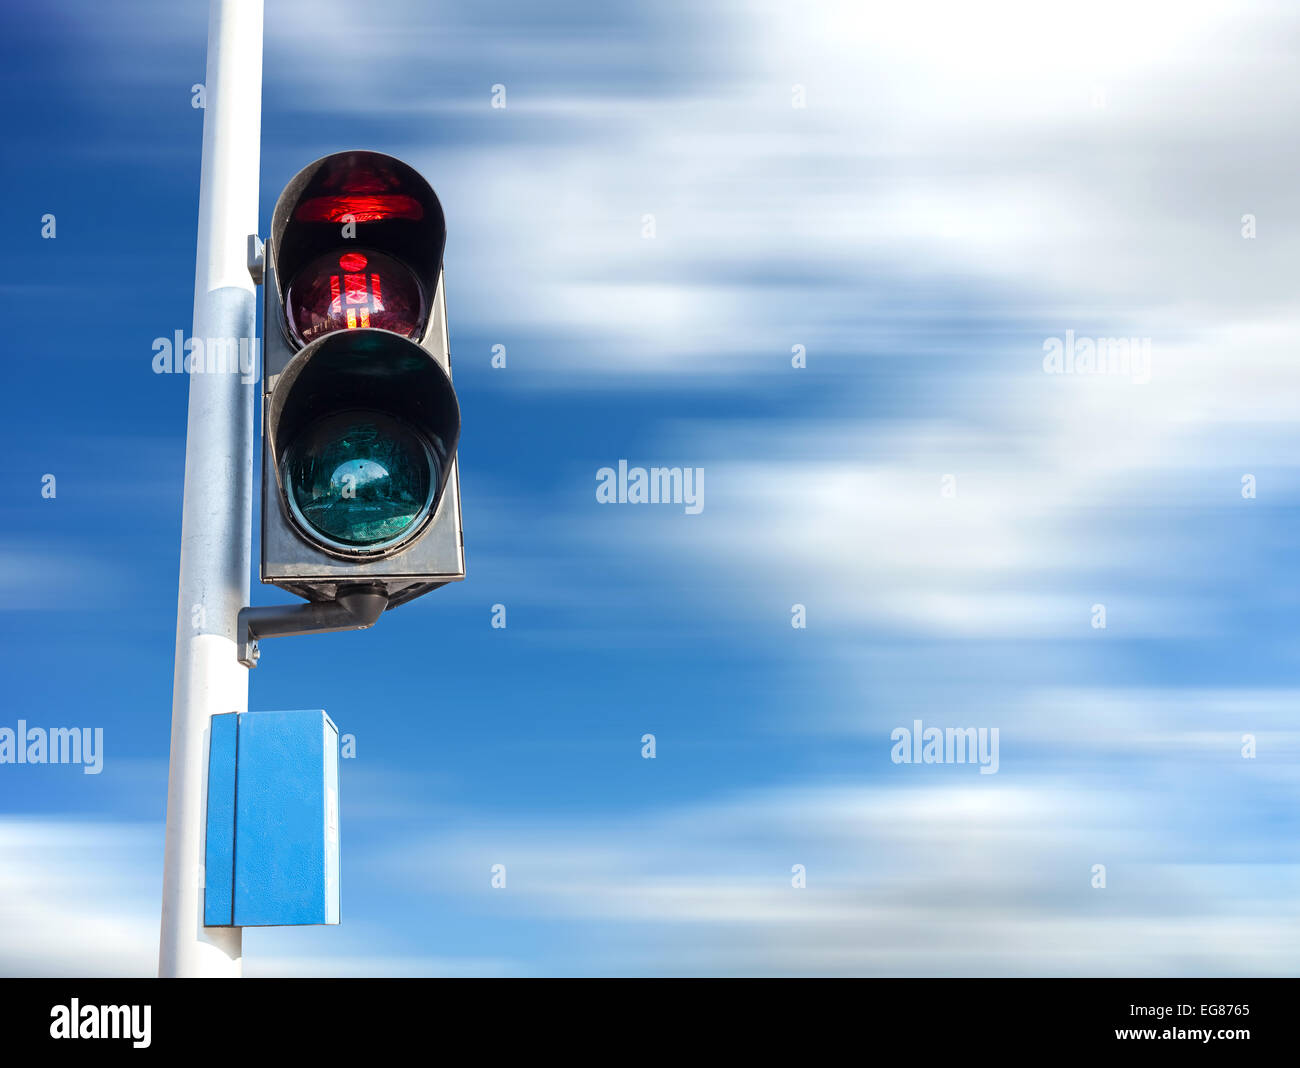 Red color on the traffic light for pedestrian, motion blurred sky. Stock Photo